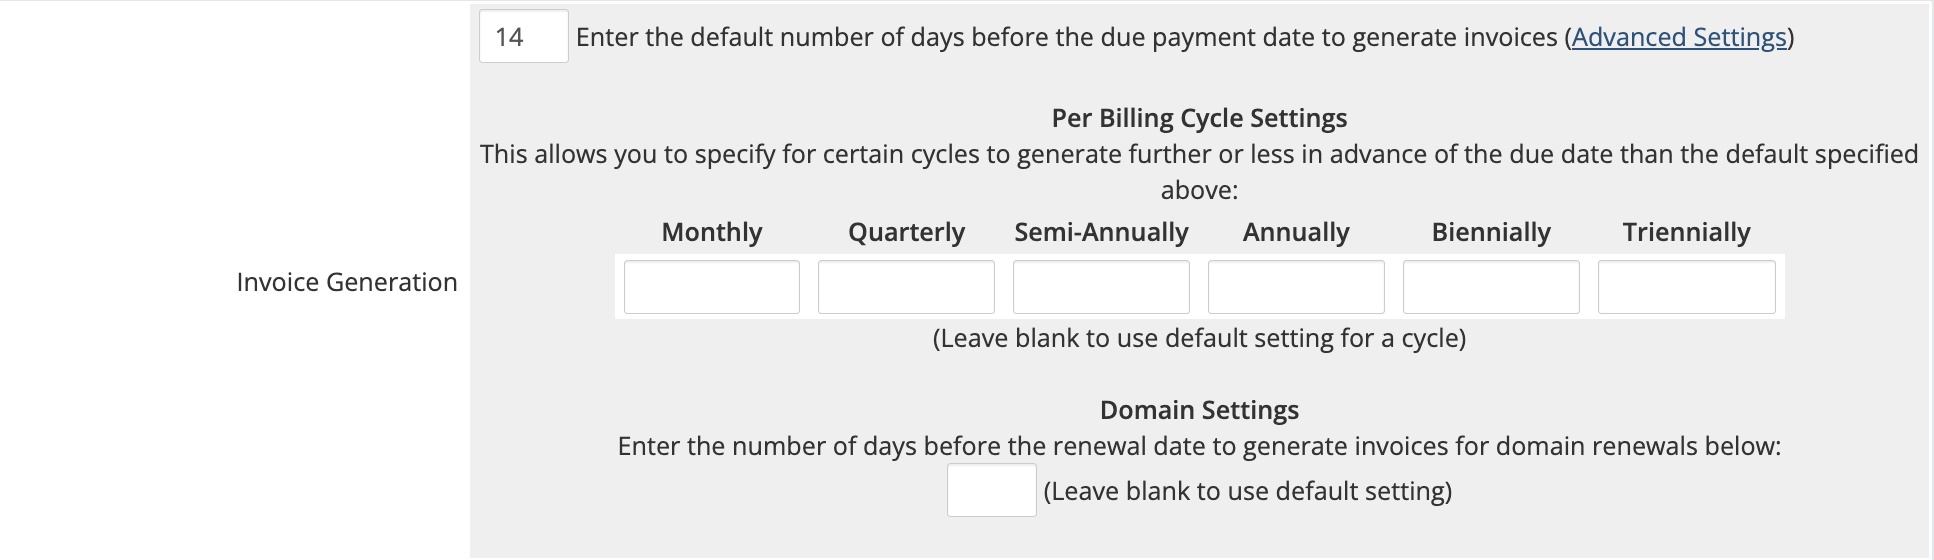 Advanced Settings for Invoice Generation in Automation Settings